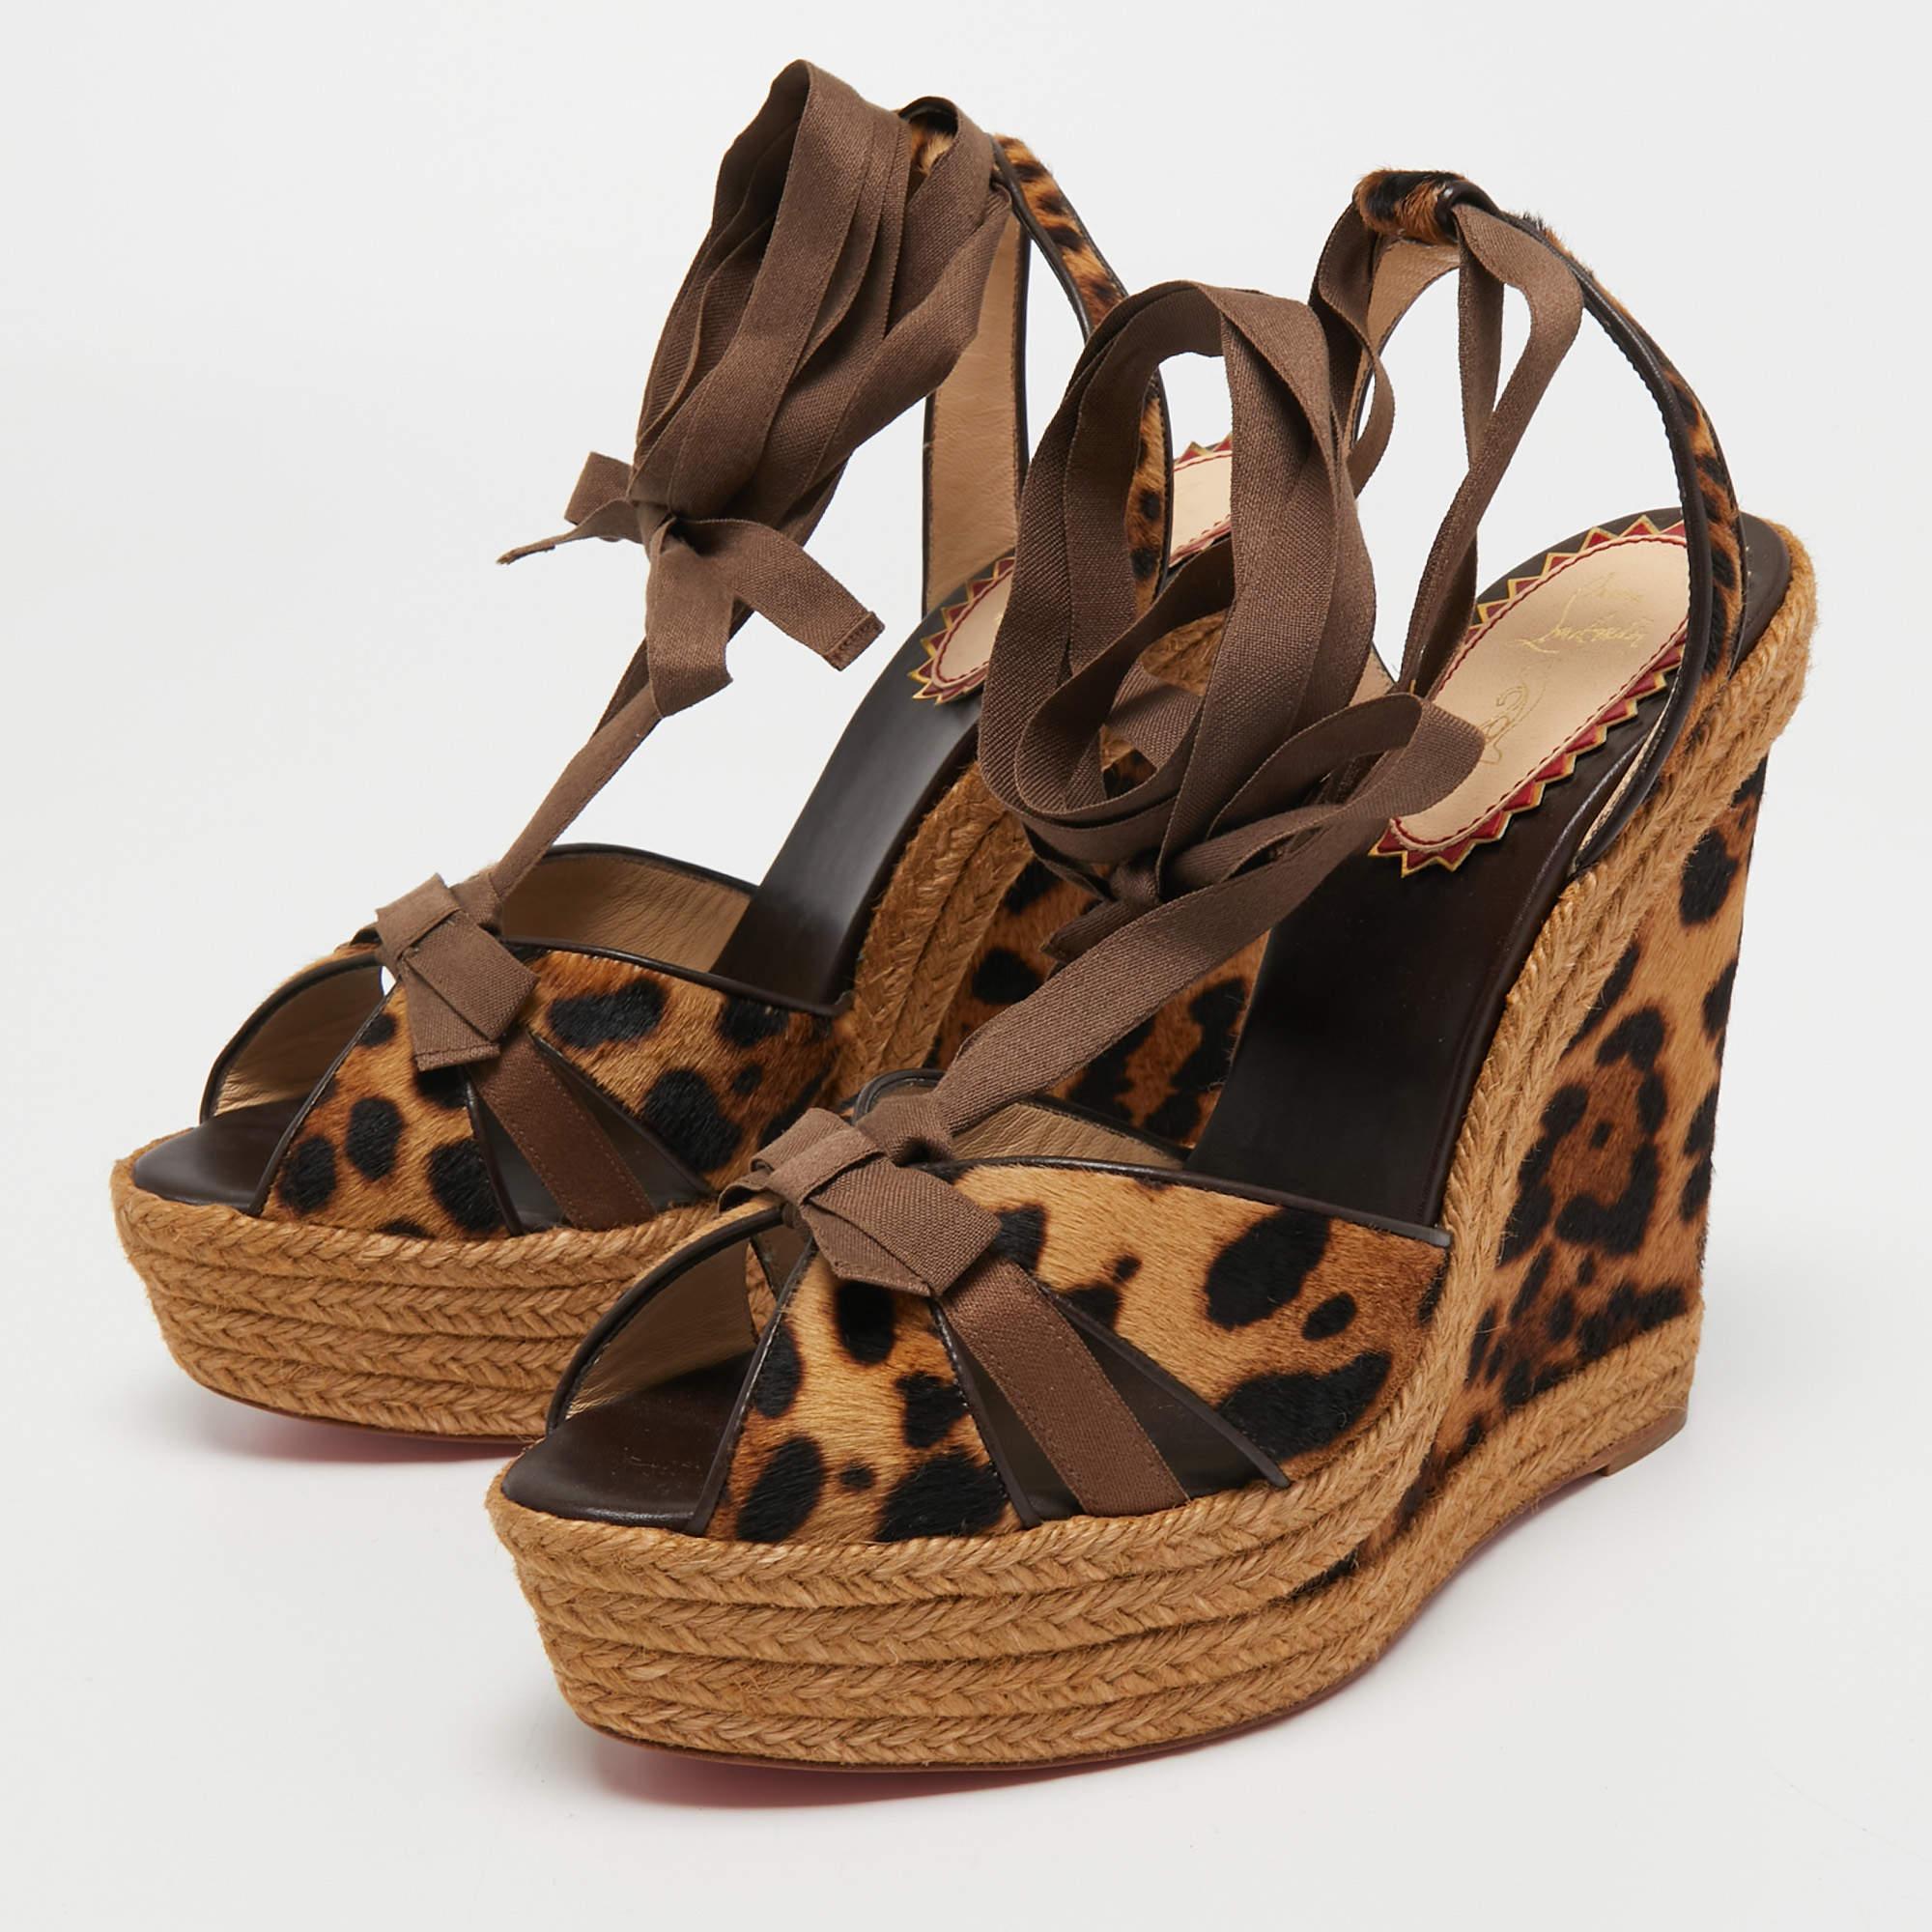 Women's Christian Louboutin Brown/Black Calf Hair and Fabric Isabelle Wedge Size 41